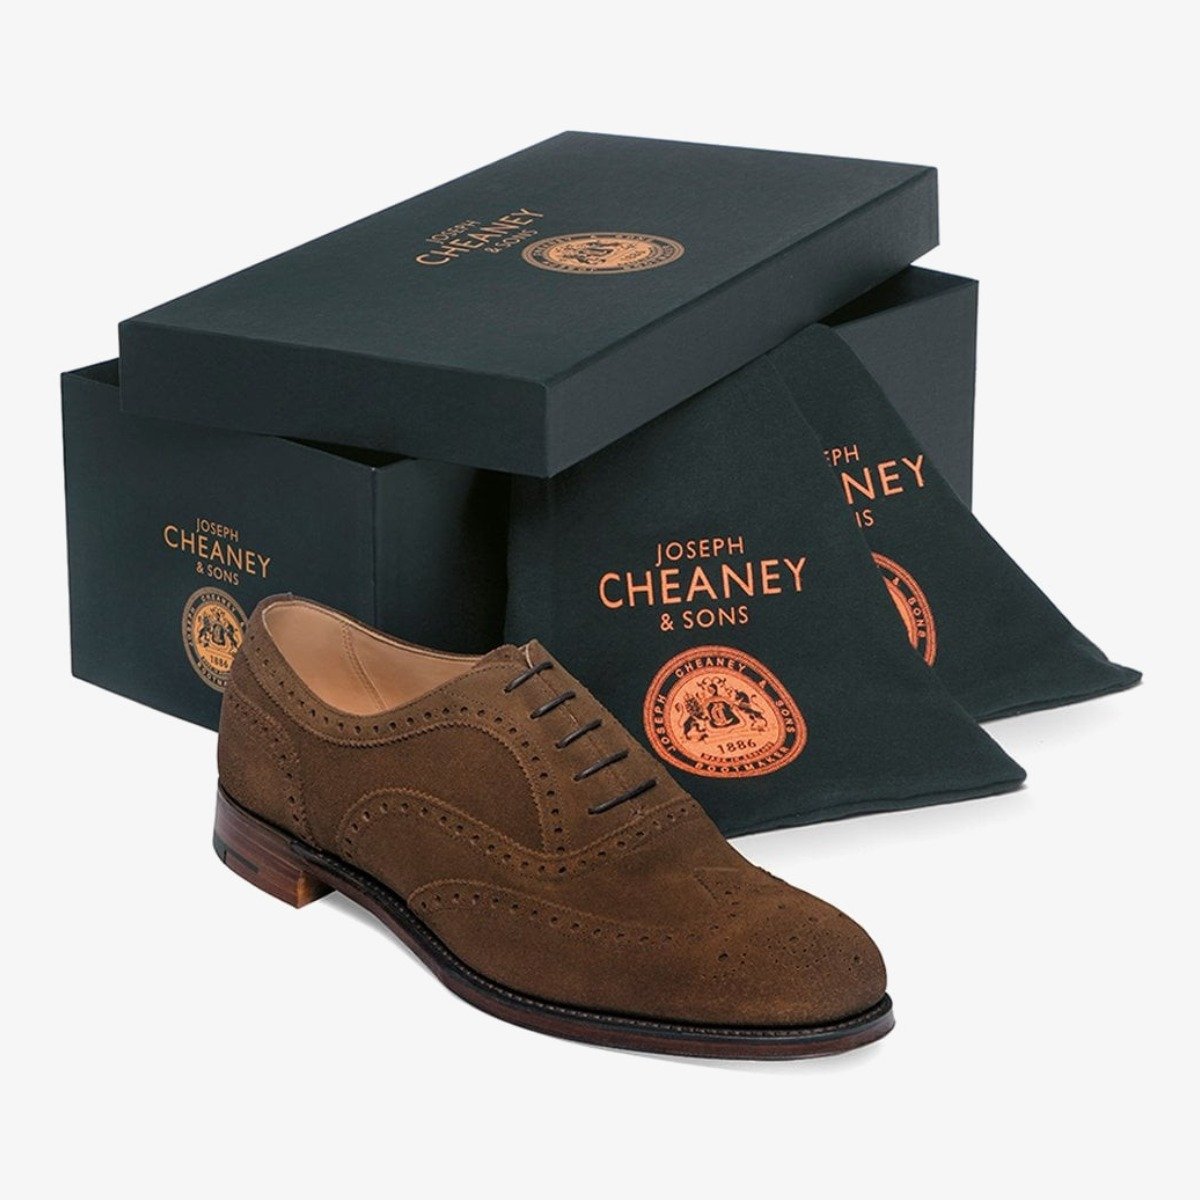 Cheaney Arthur III plough suede brogue oxford shoes